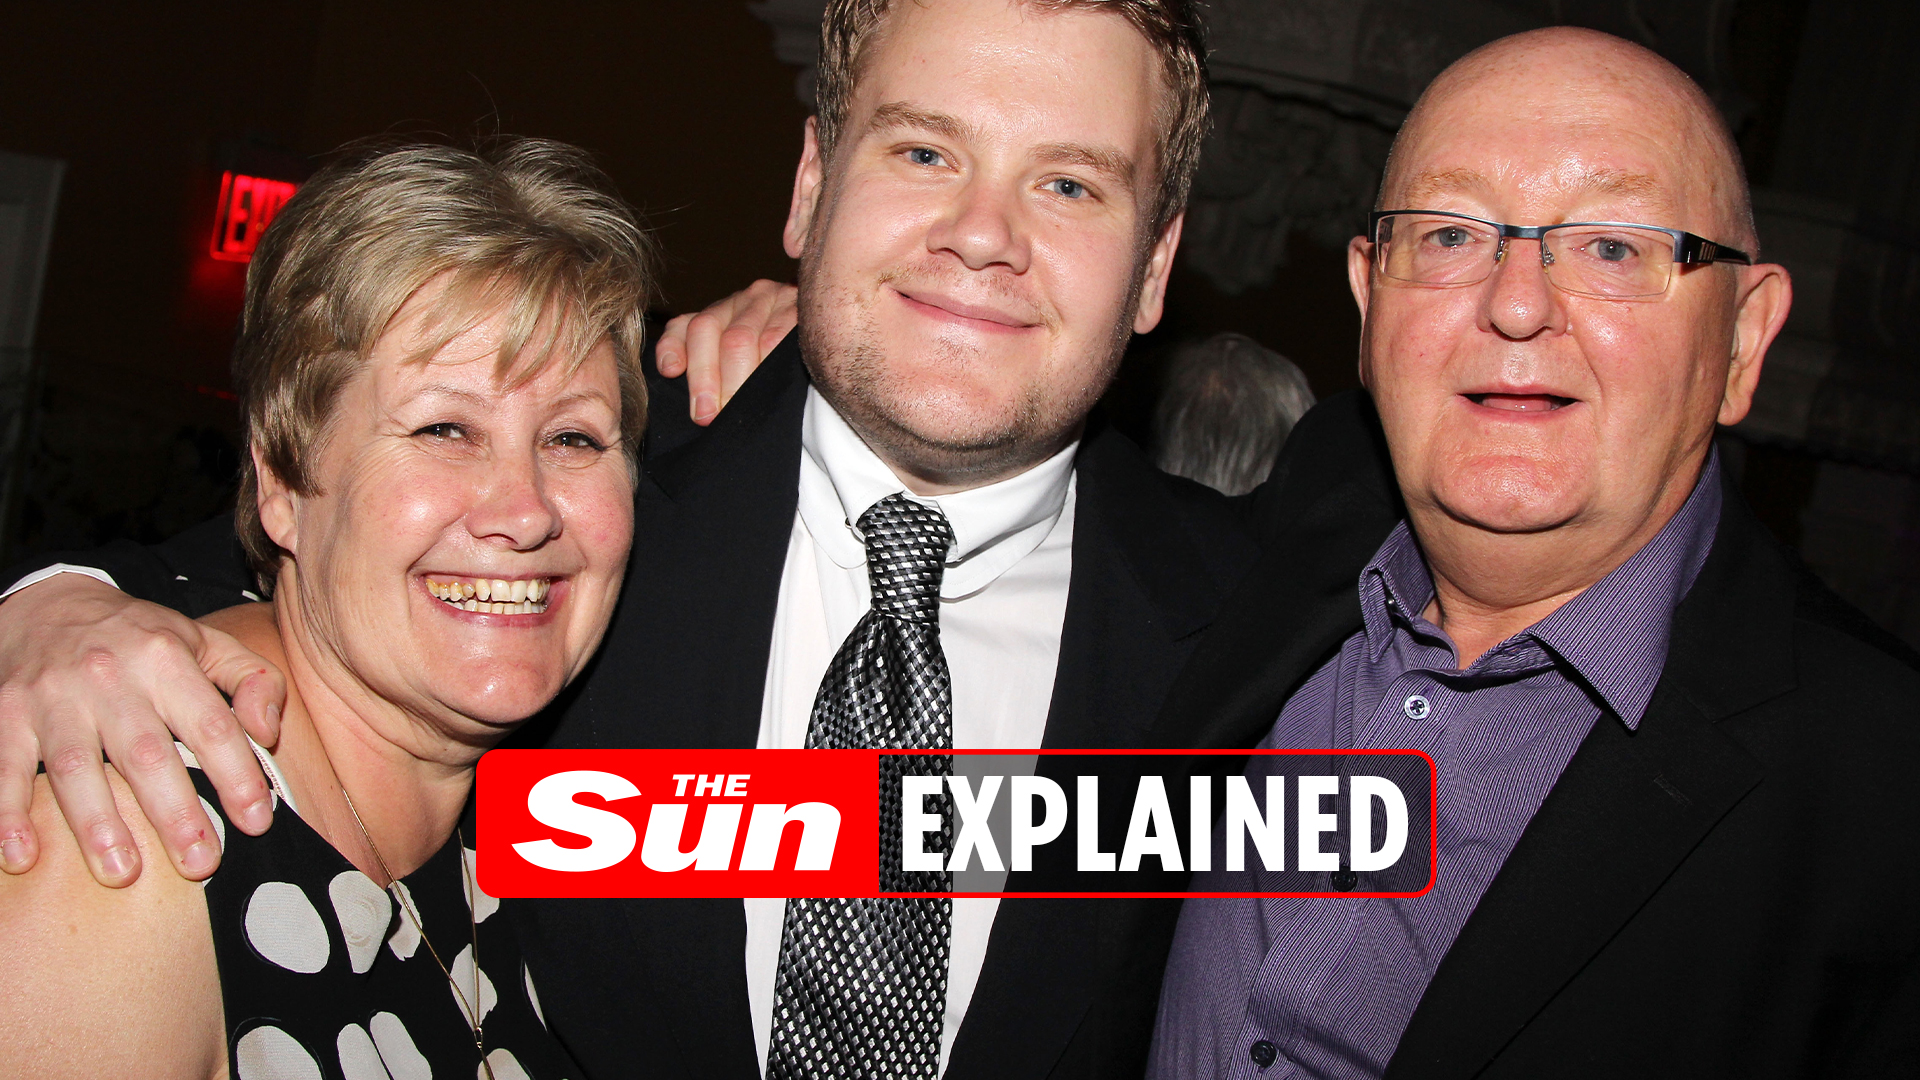 Who are James Corden's parents?